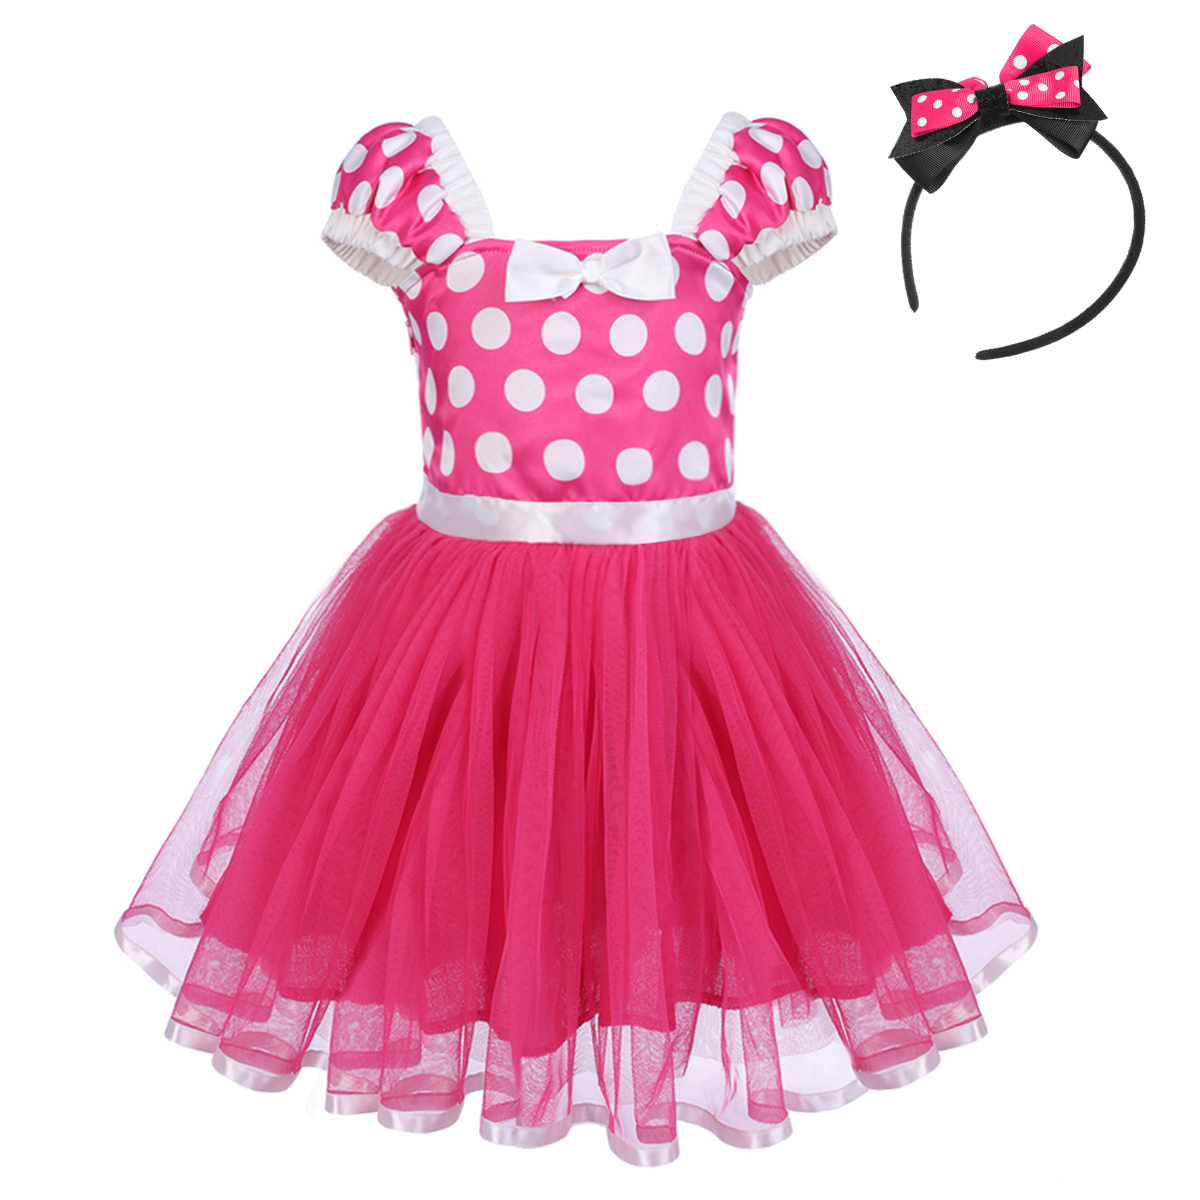 IBTOM CASTLE Toddler Girls Polka Dots Princess Party Cosplay Pageant Fancy Dress up Birthday Tutu Dress + Ears Headband Outfit Set 3-4 Years Hot Pink - image 2 of 8